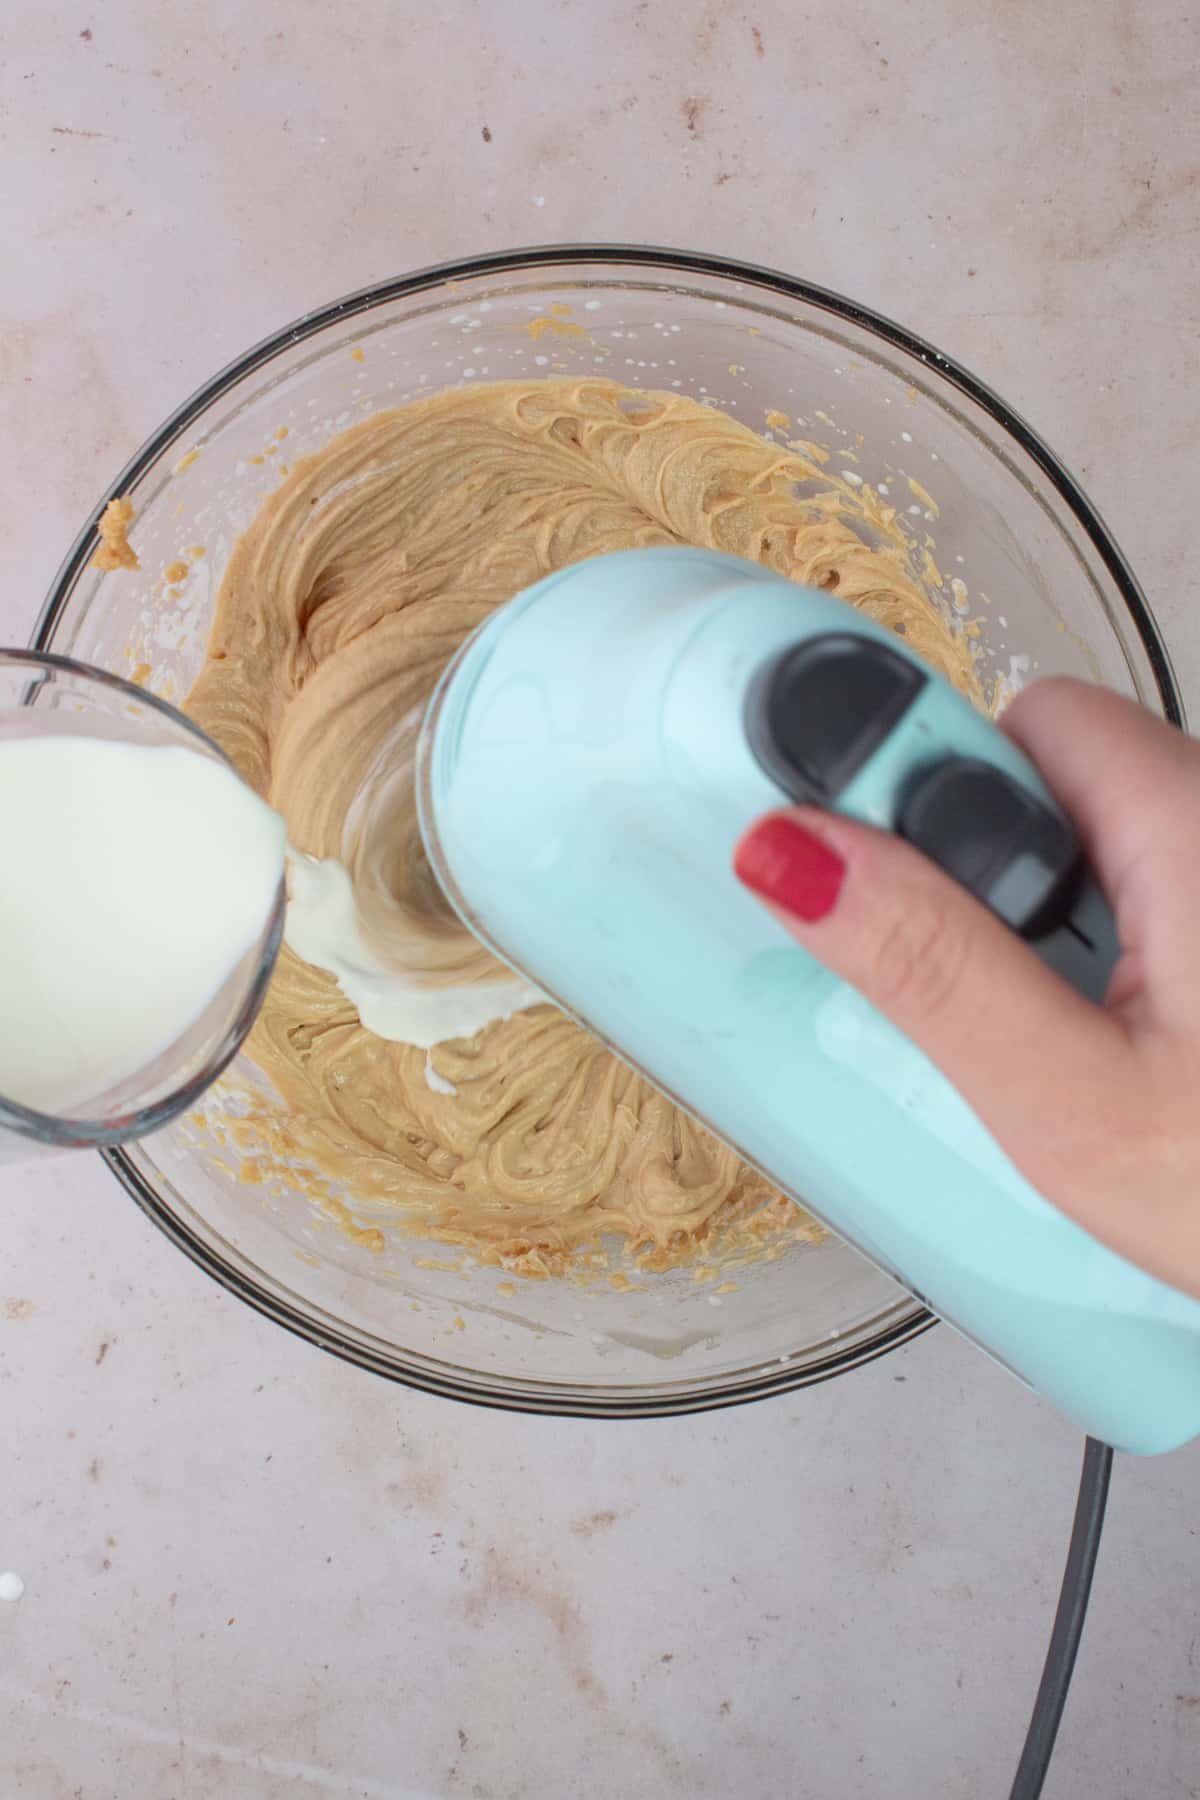 Electric mixer beating heavy cream into peanut butter filling.